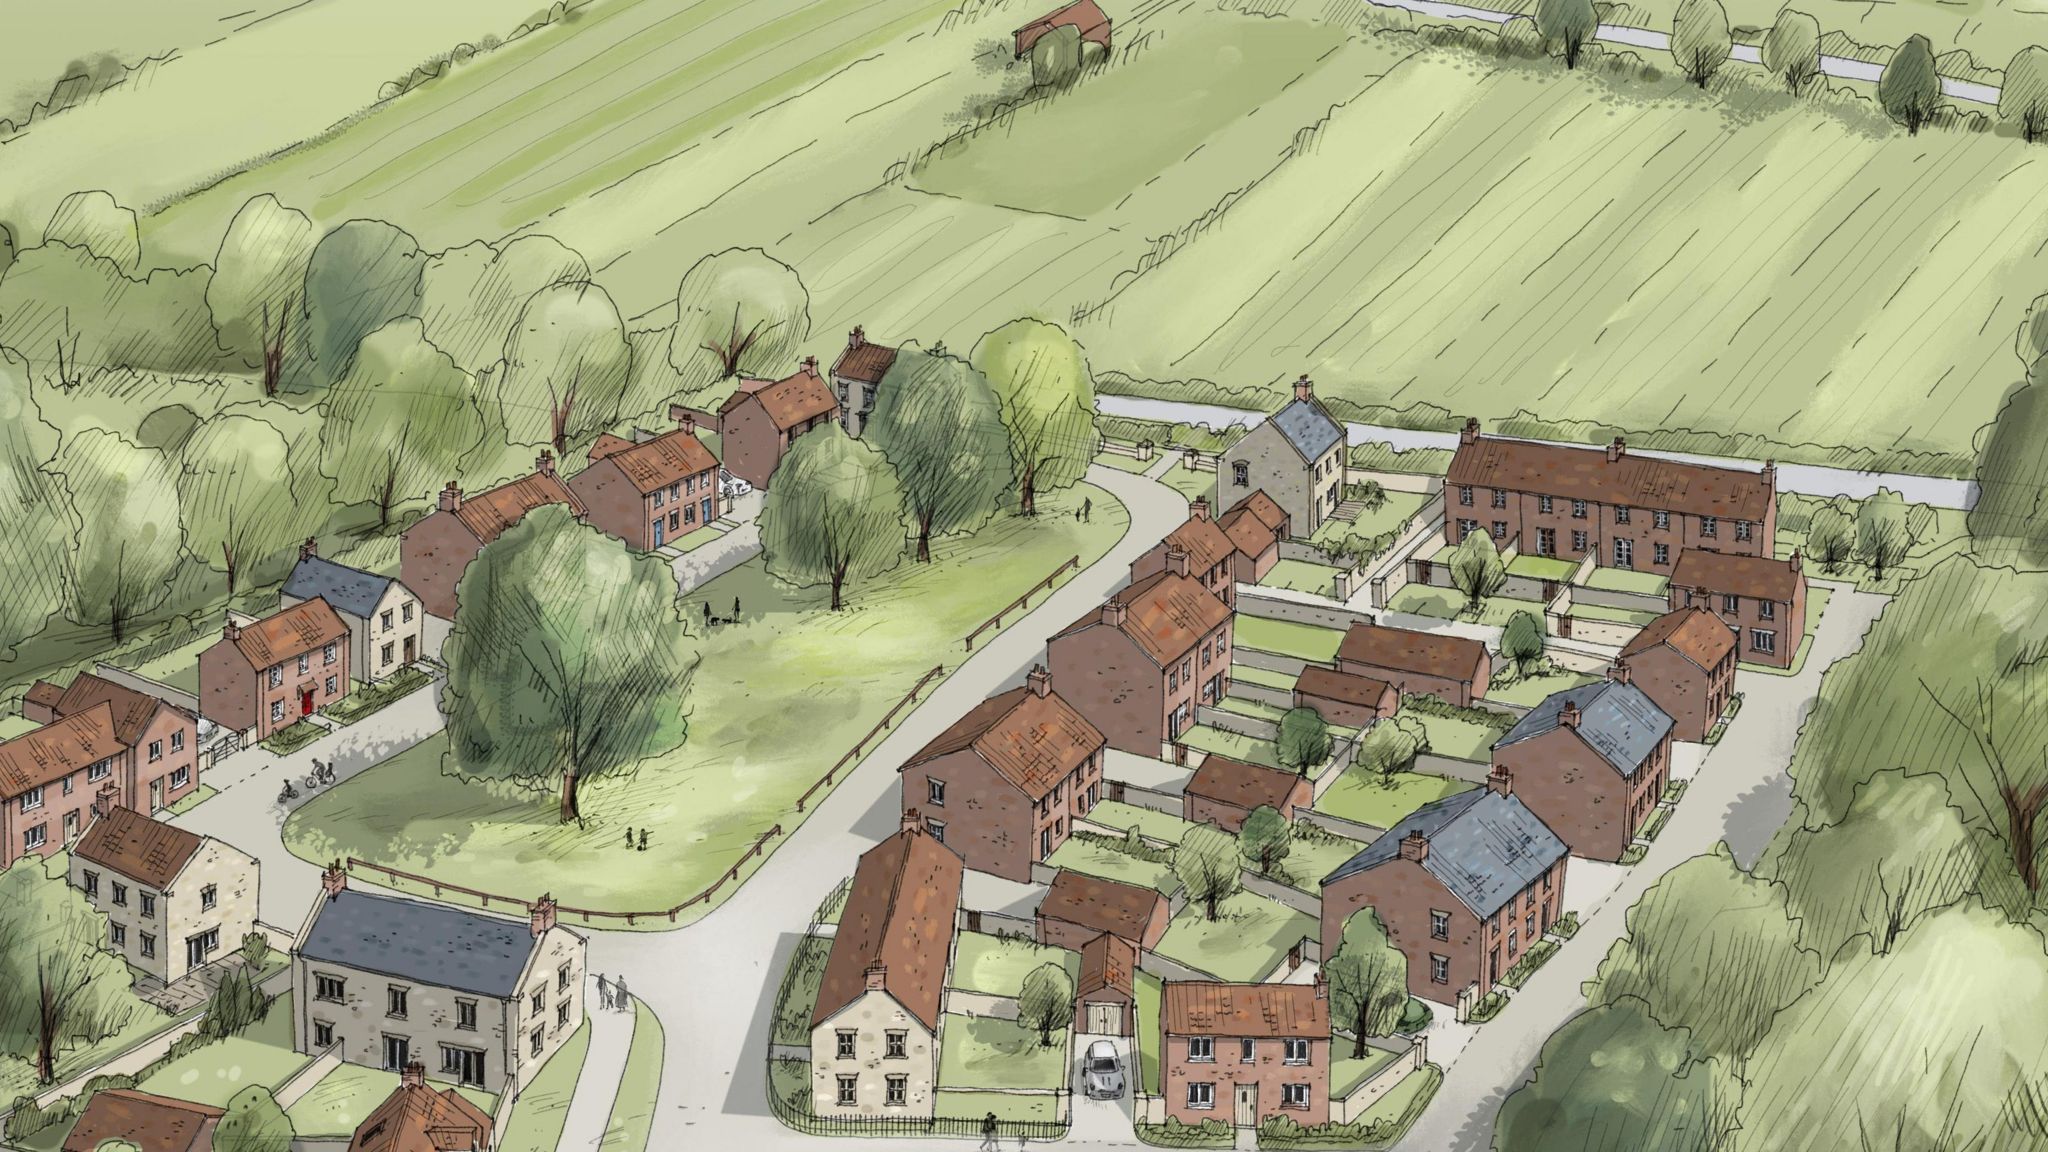 An artist's impression of how Castle Howard Estates' plans for 26 new homes in Slingsby may appear